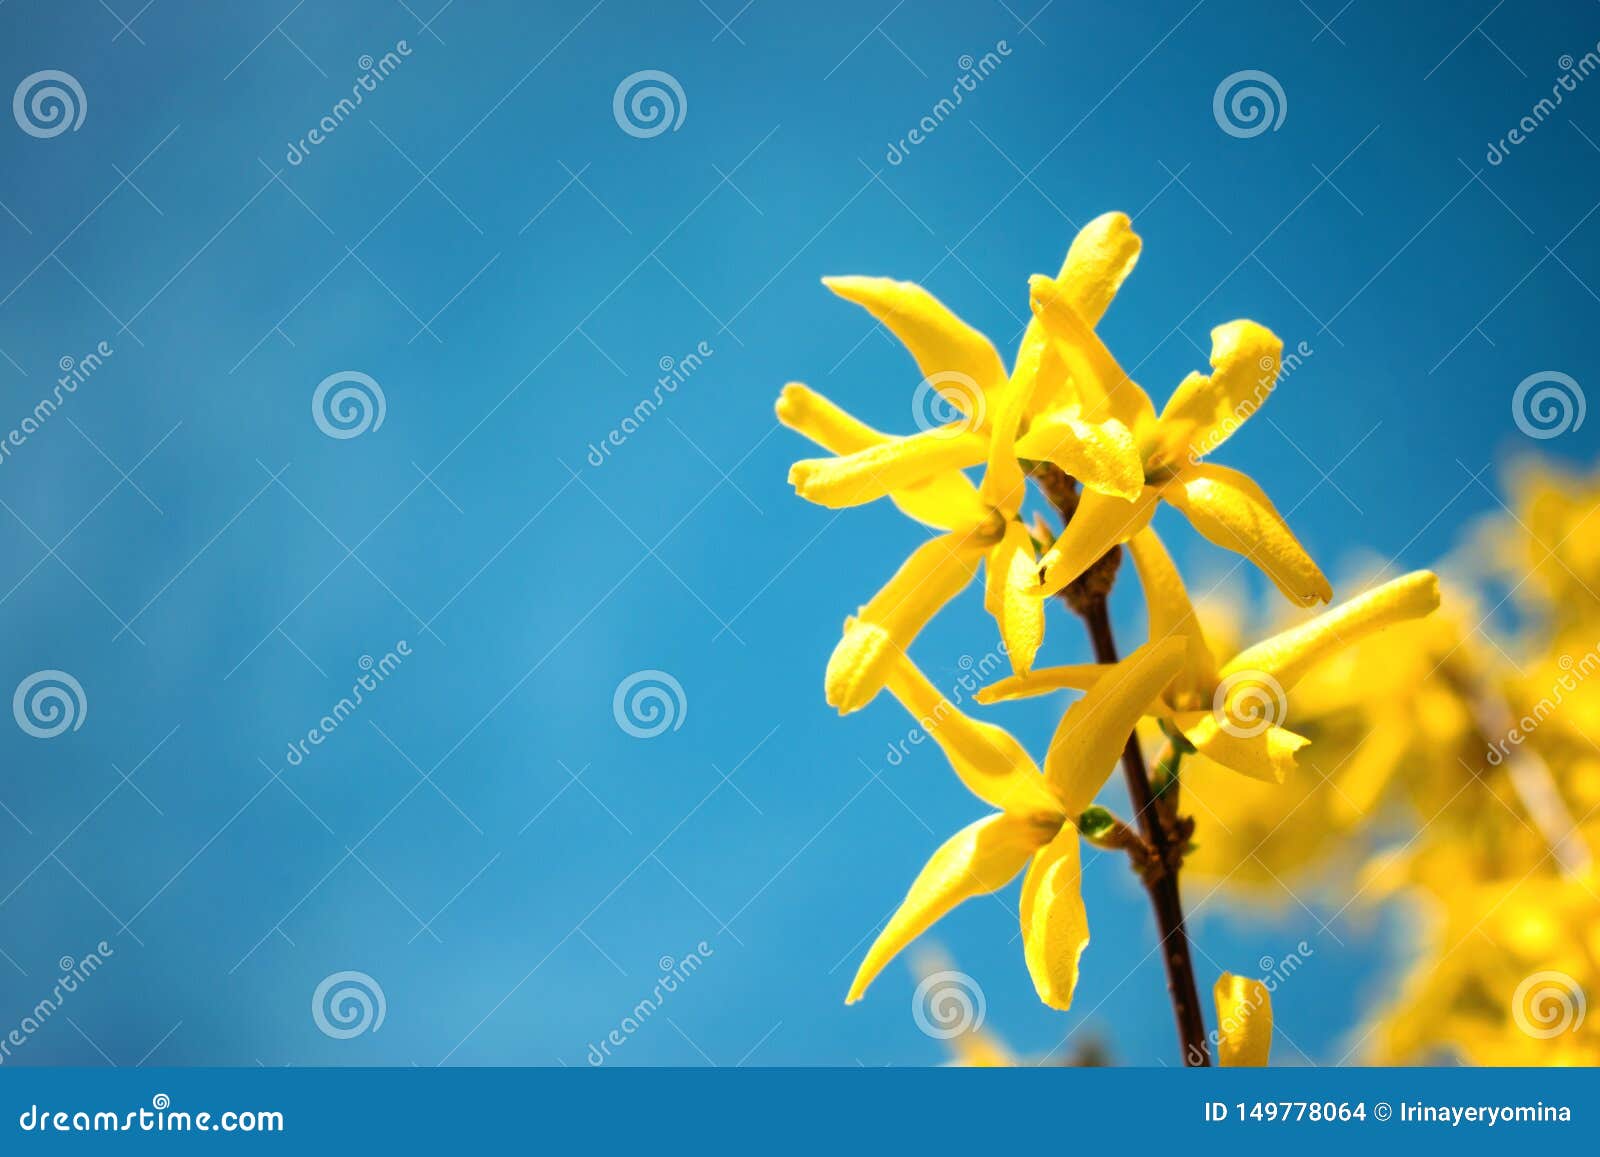 yellow blooming forsythia flowers on the blue sky background. a branch with bright yellow flowers in spring close up. golden bell